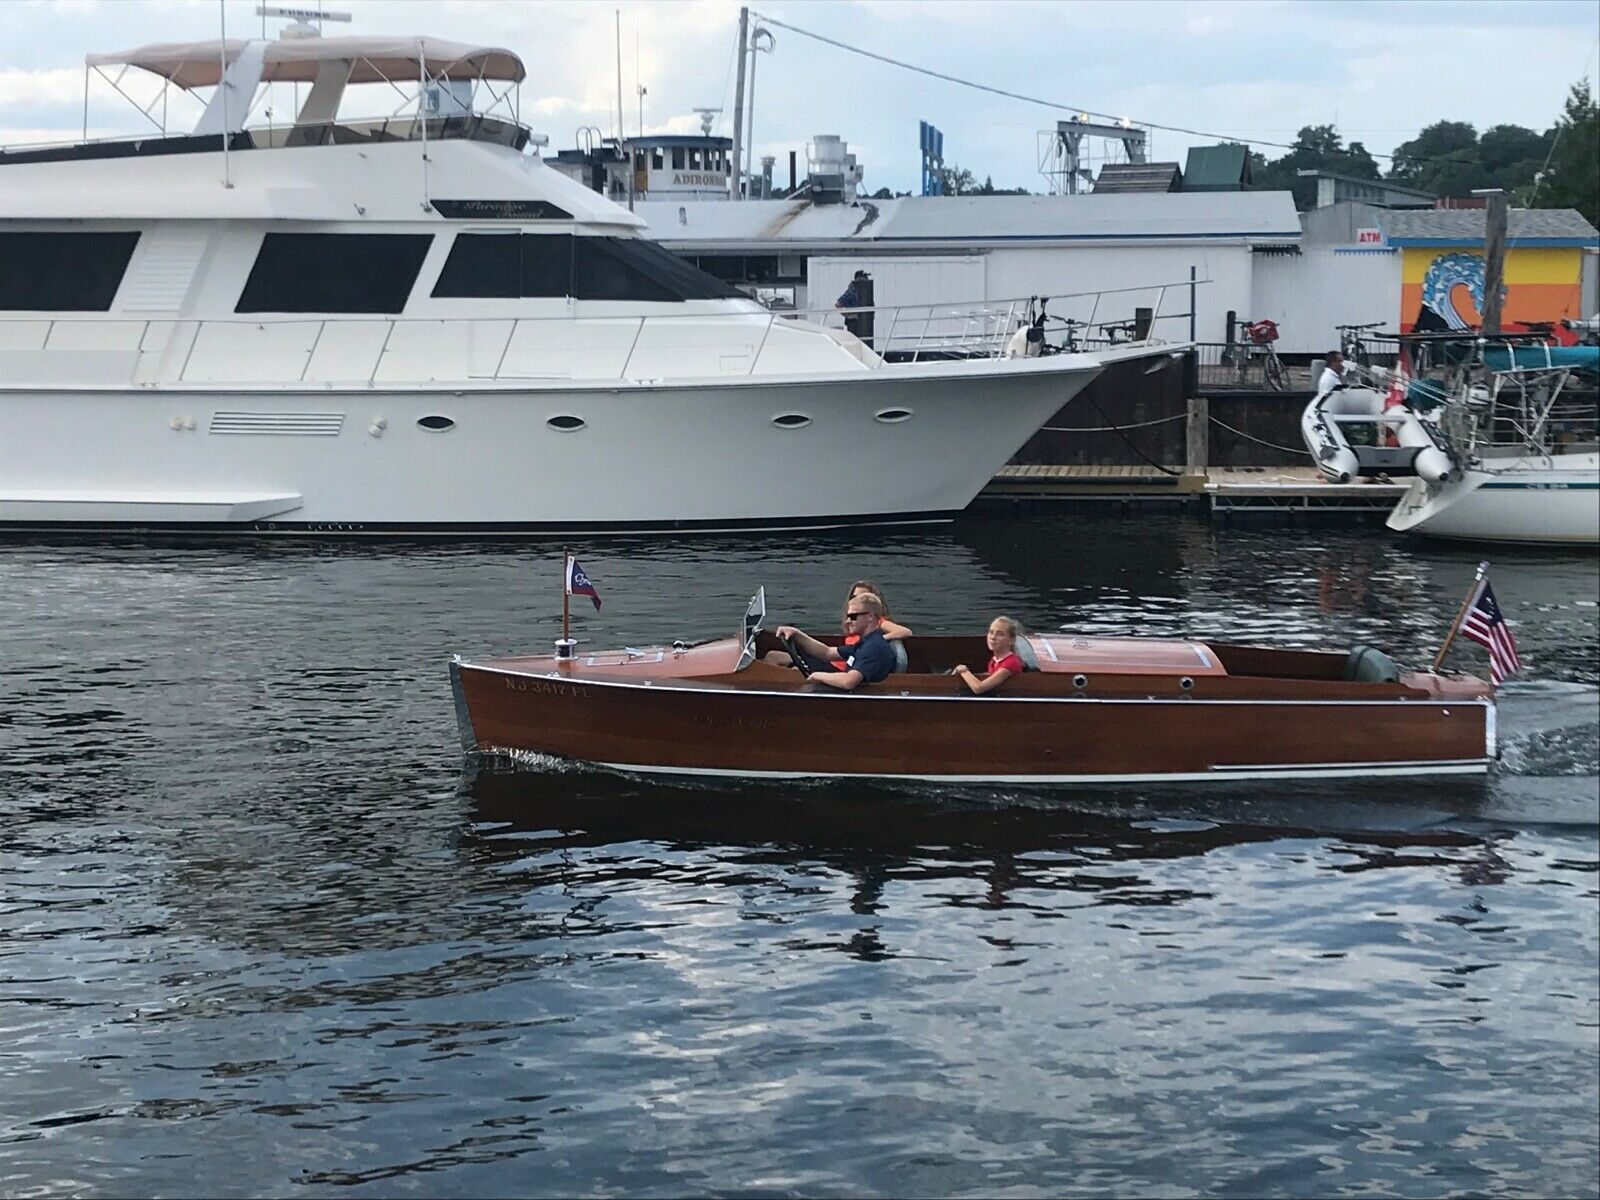 1930 chris craft runabout 26 ft triple